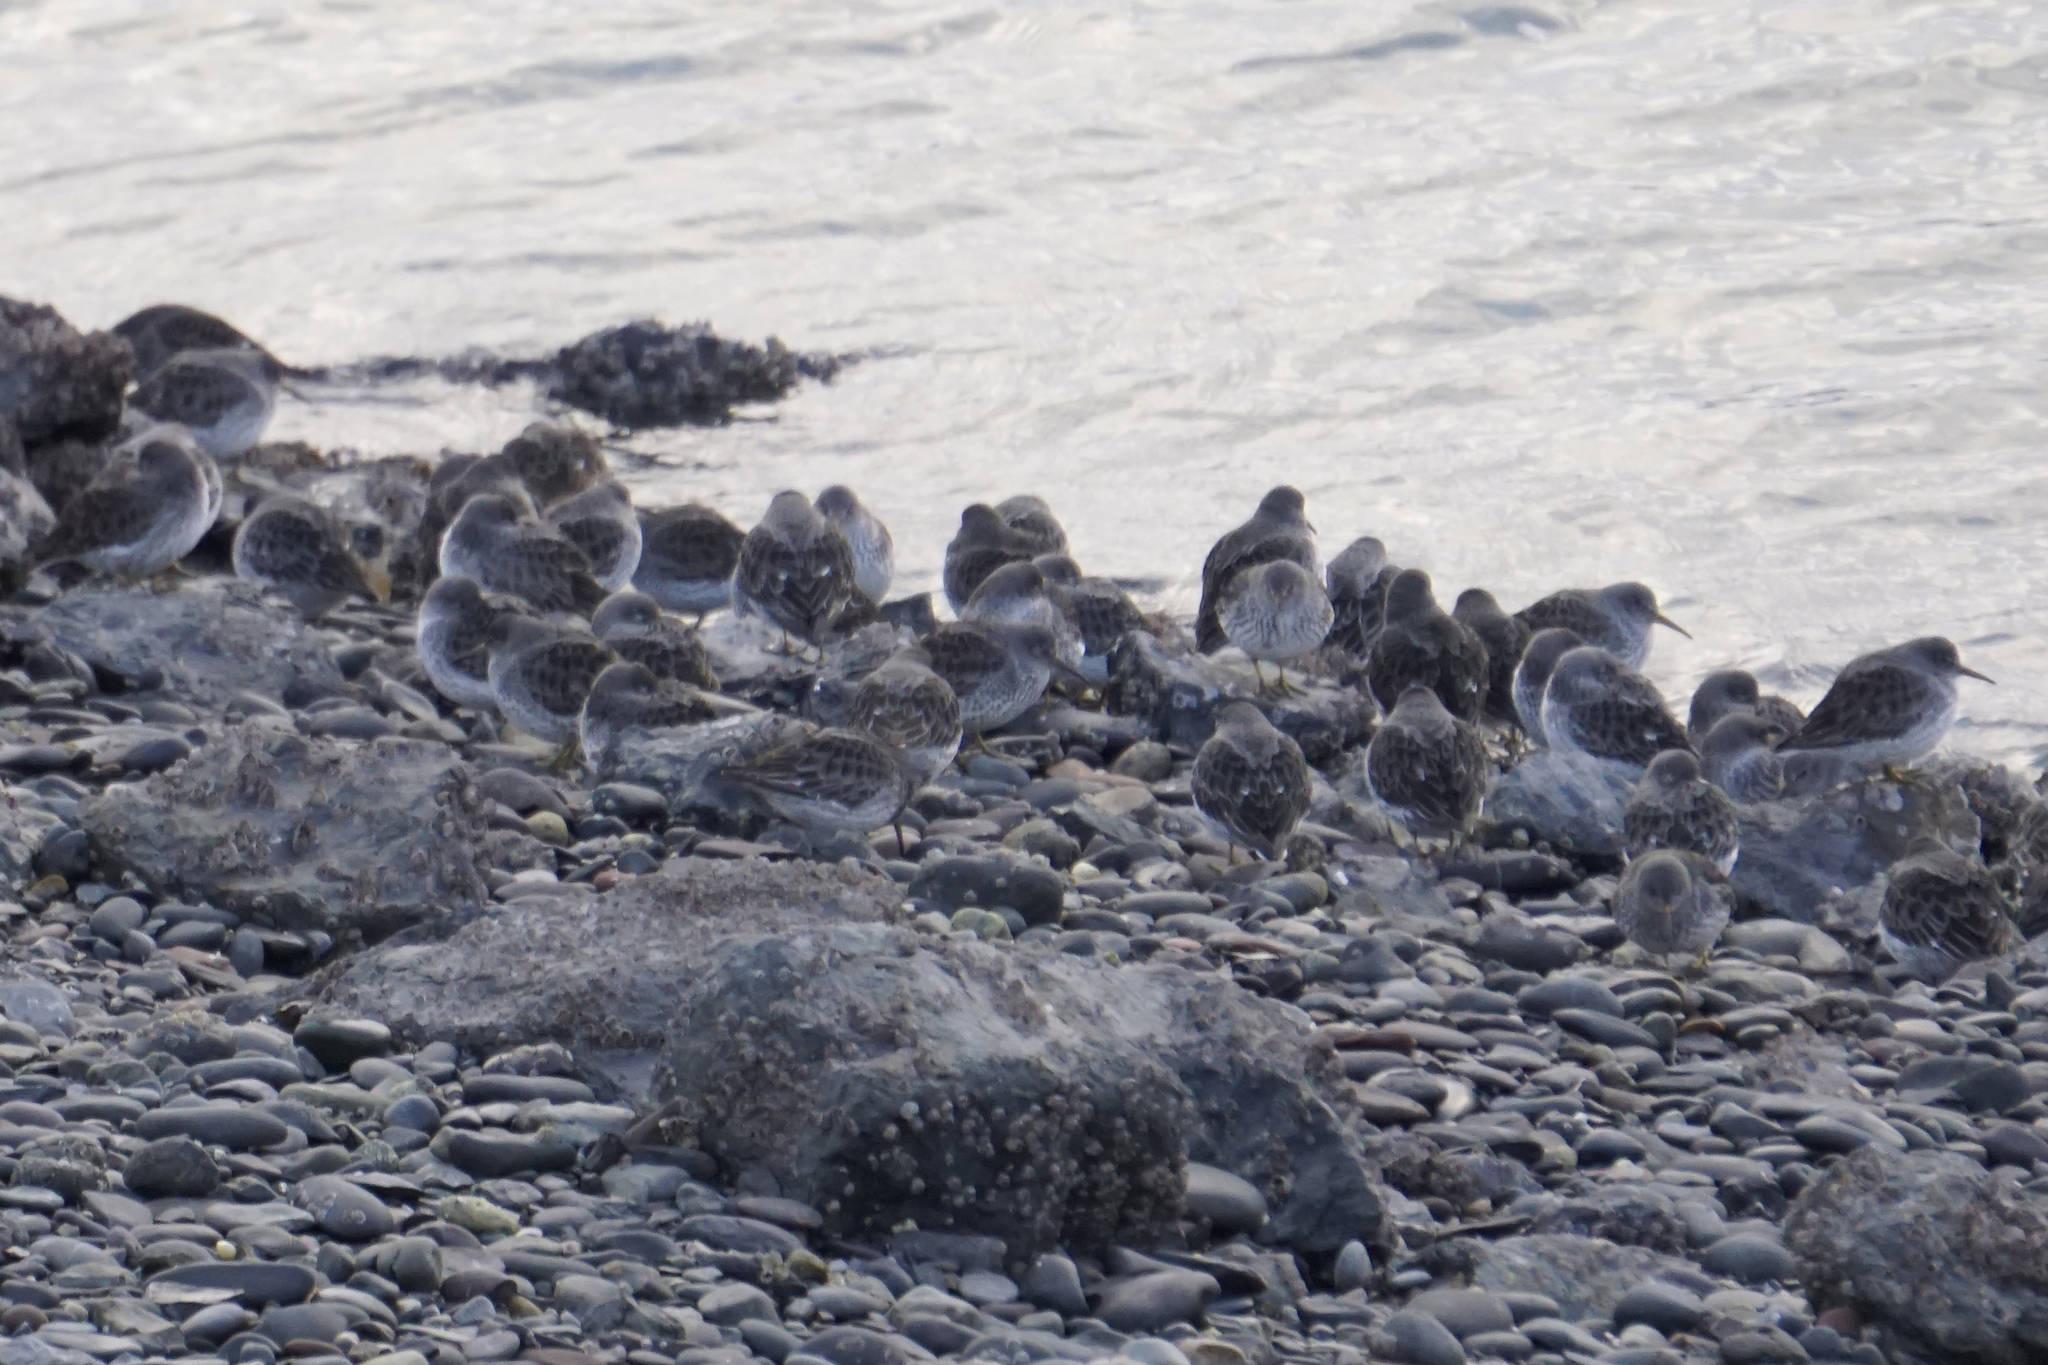 Rock sandpipers cluster on the rocks at the Homer Harbor on Tuesday, Dec. 17, 2019, in Homer, Alaska. The winter shorebirds were one of the species counted in the annual Homer Christmas Bird Count. (Photo by Michael Armstrong/Homer News)